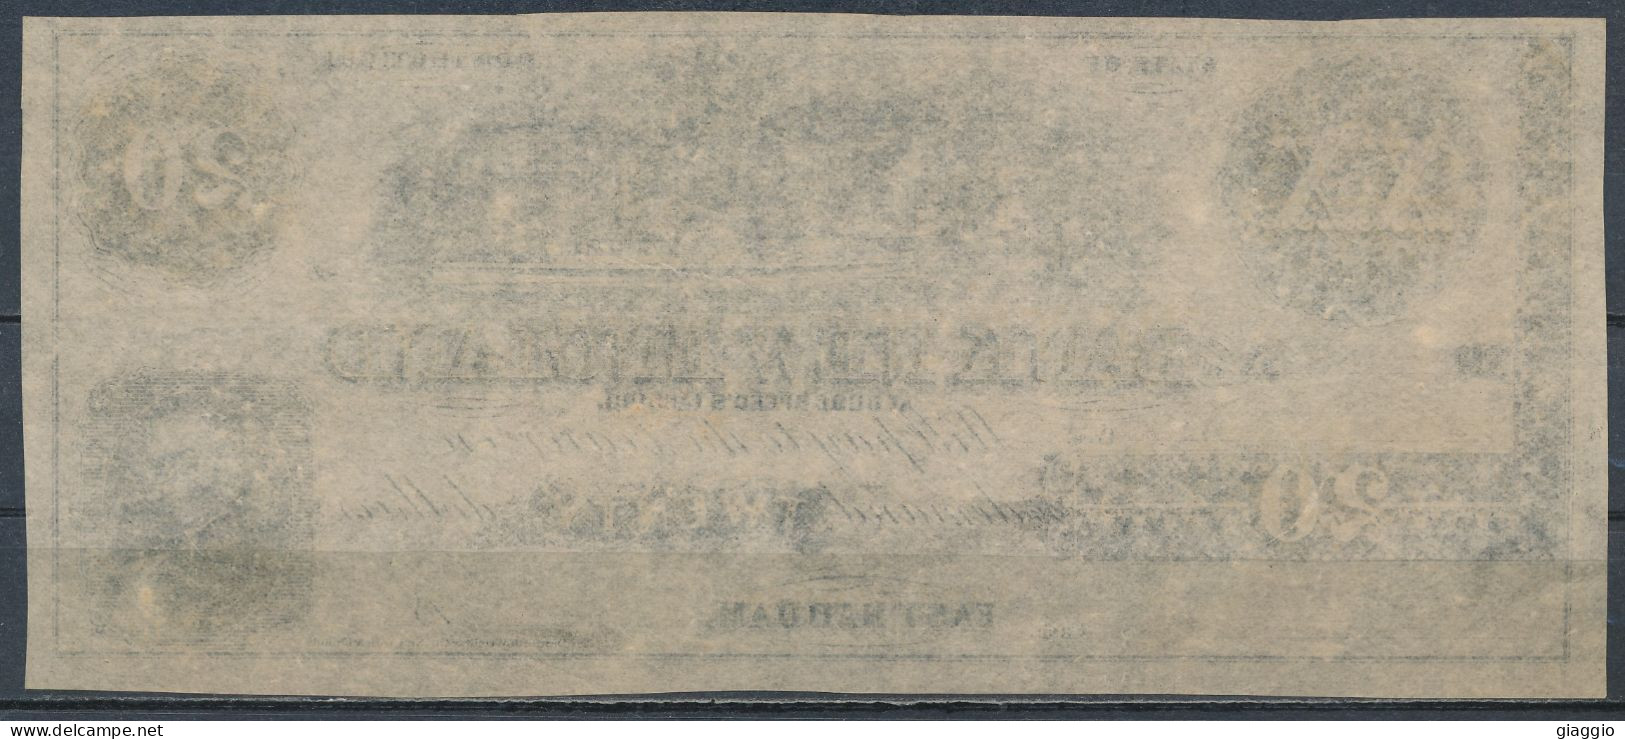 °°° USA - 20 DOLLARS 1860 BANK NEW ENGLAND °°° - Confederate Currency (1861-1864)